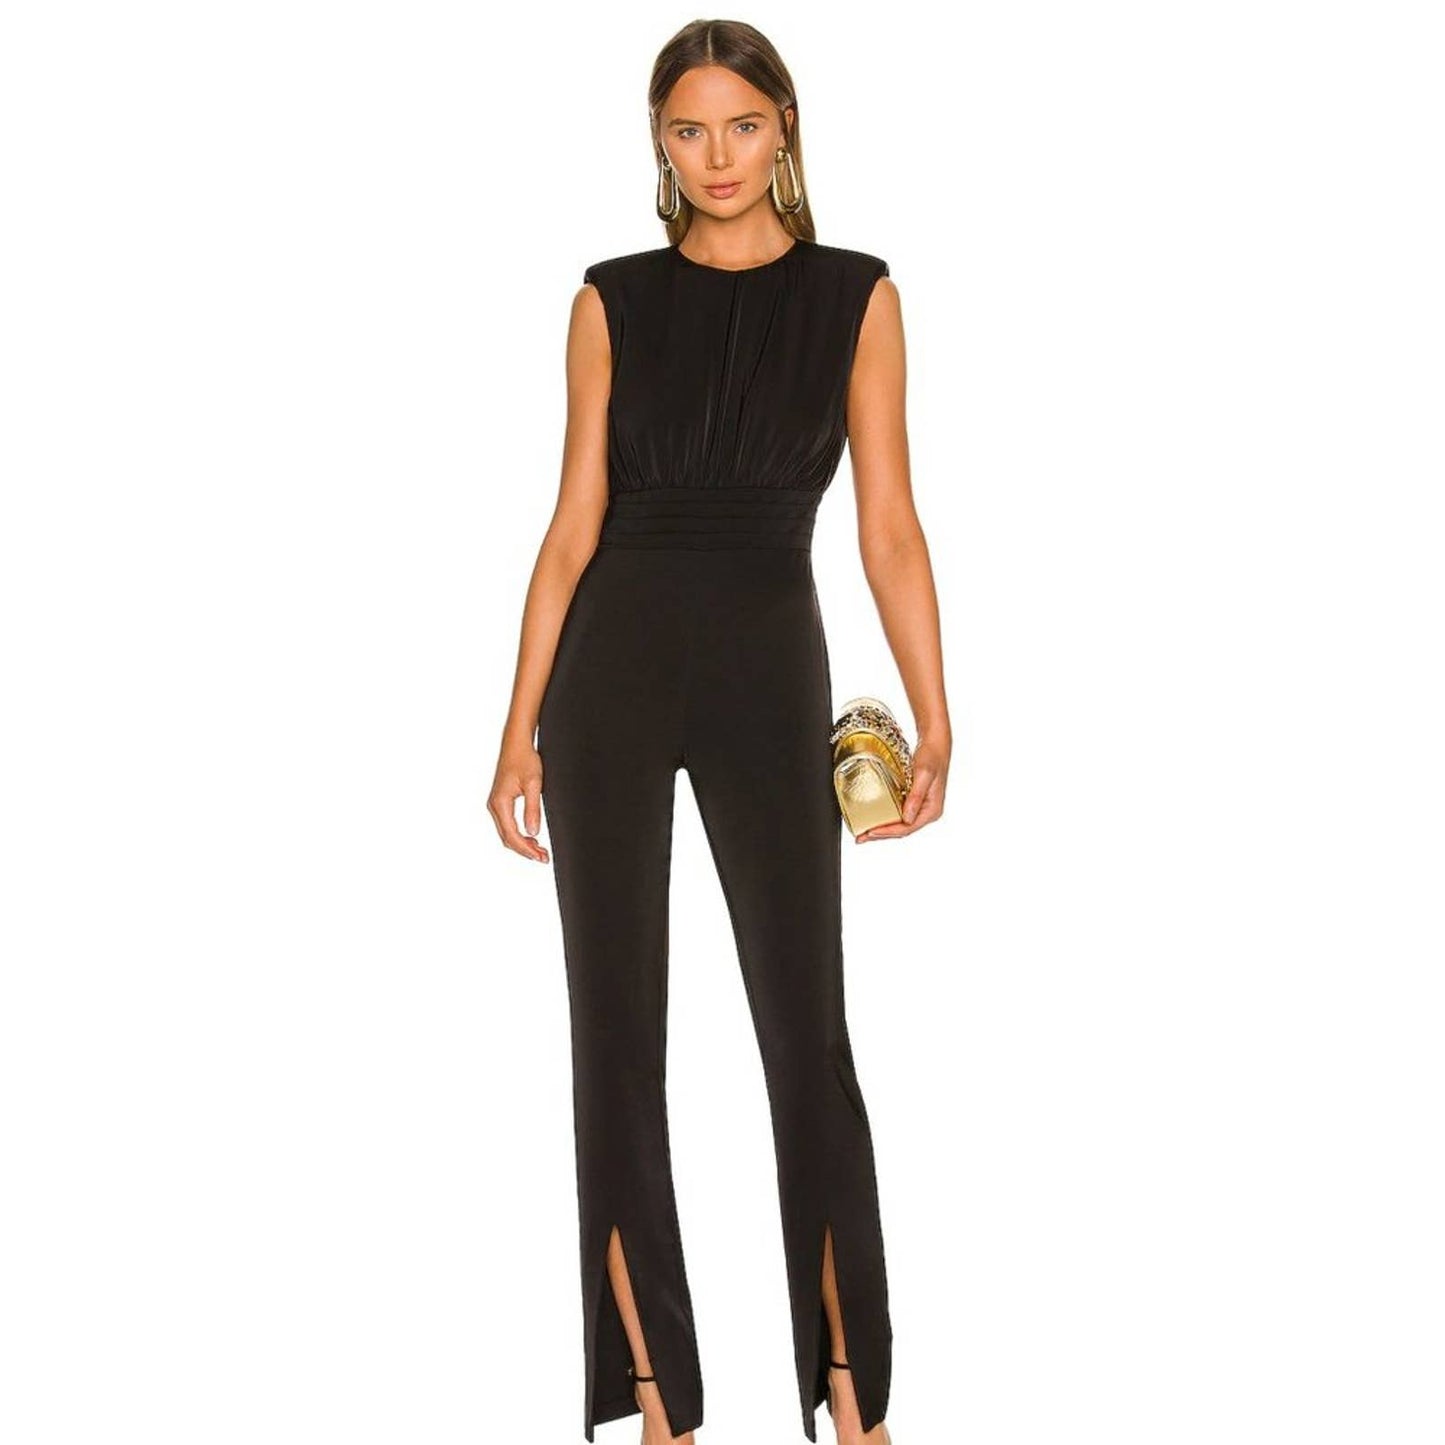 NBD Adler Jumpsuit in Black NWT Size Small